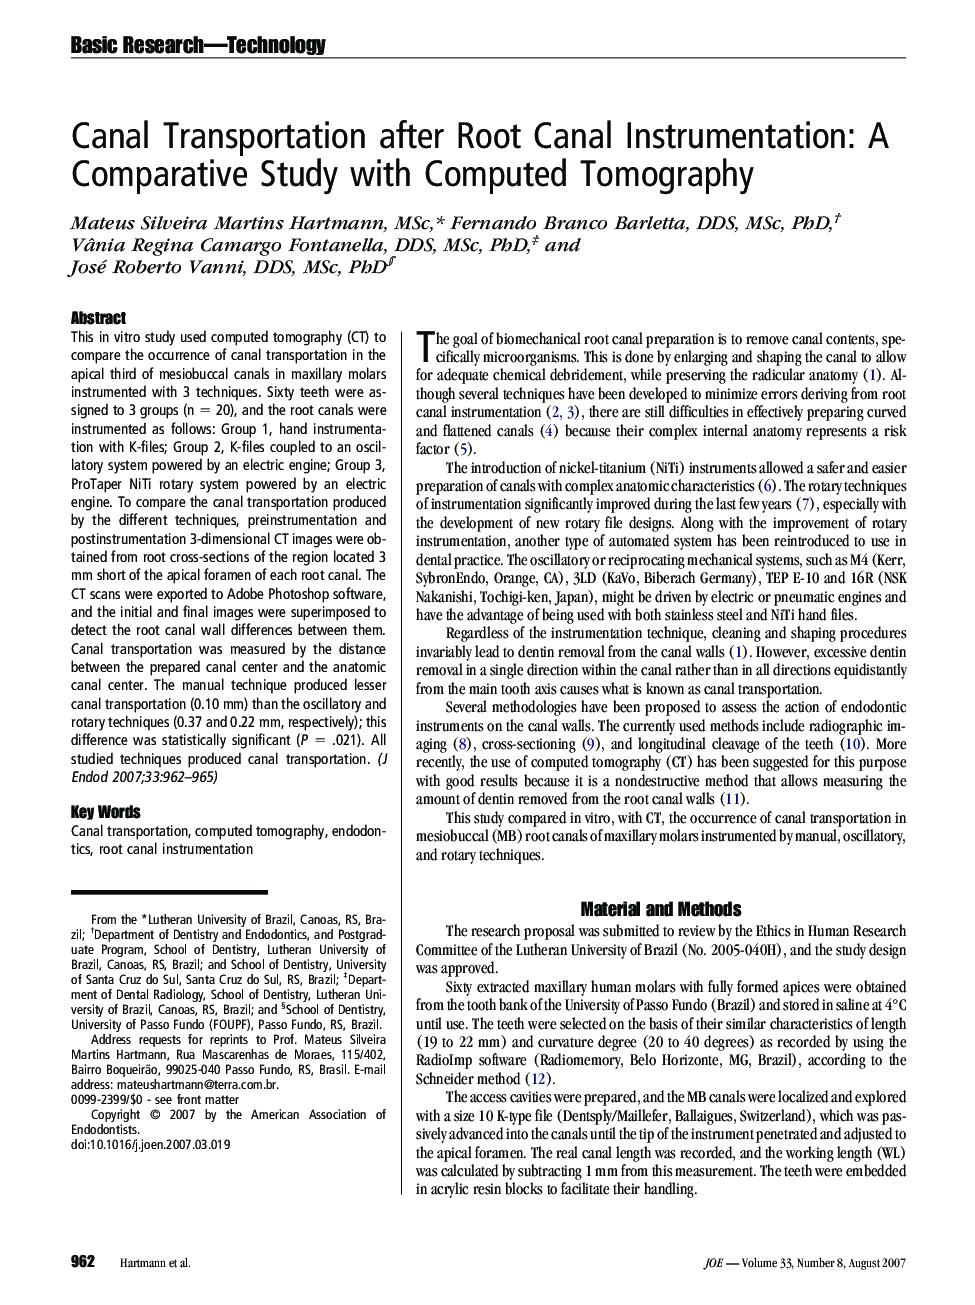 Canal Transportation after Root Canal Instrumentation: A Comparative Study with Computed Tomography